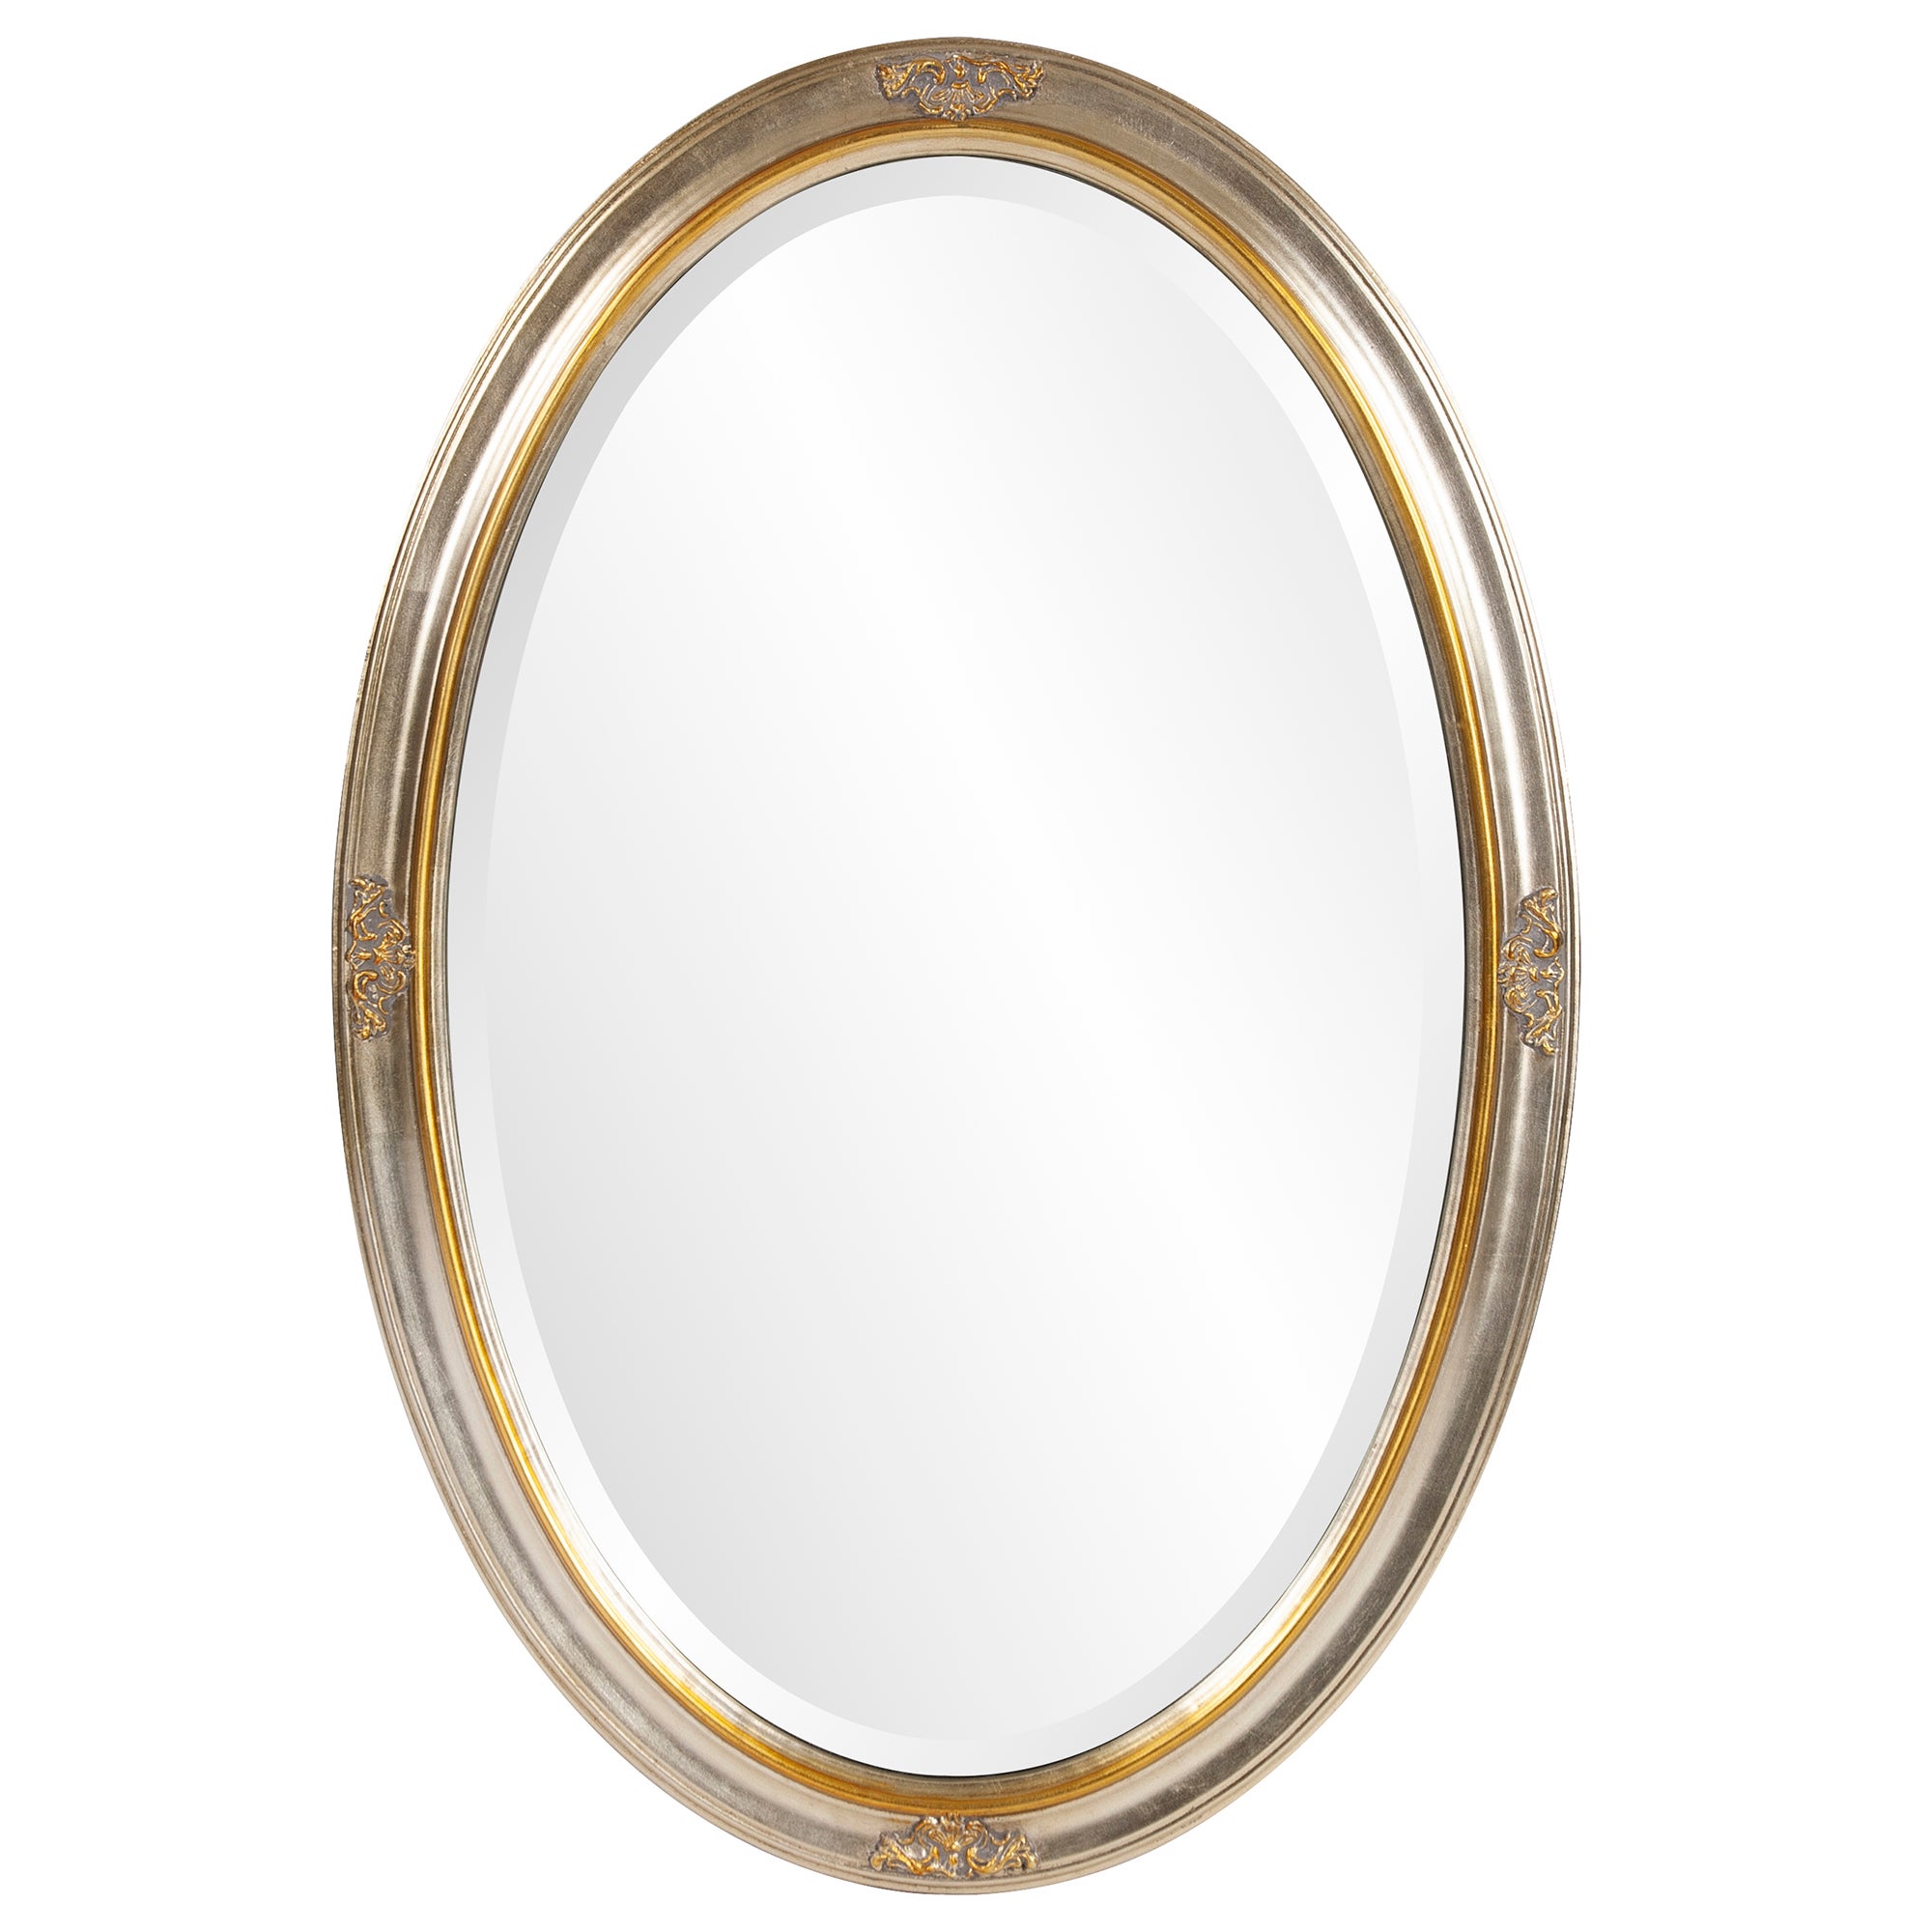 19 x 27 Inch Howard Elliott Trafalgar Virginia Gold Leaf Oval Wall Mounted Mirror with Cameo-Esque Wood Frame Decorative Wall Mirrors for Home and Office 